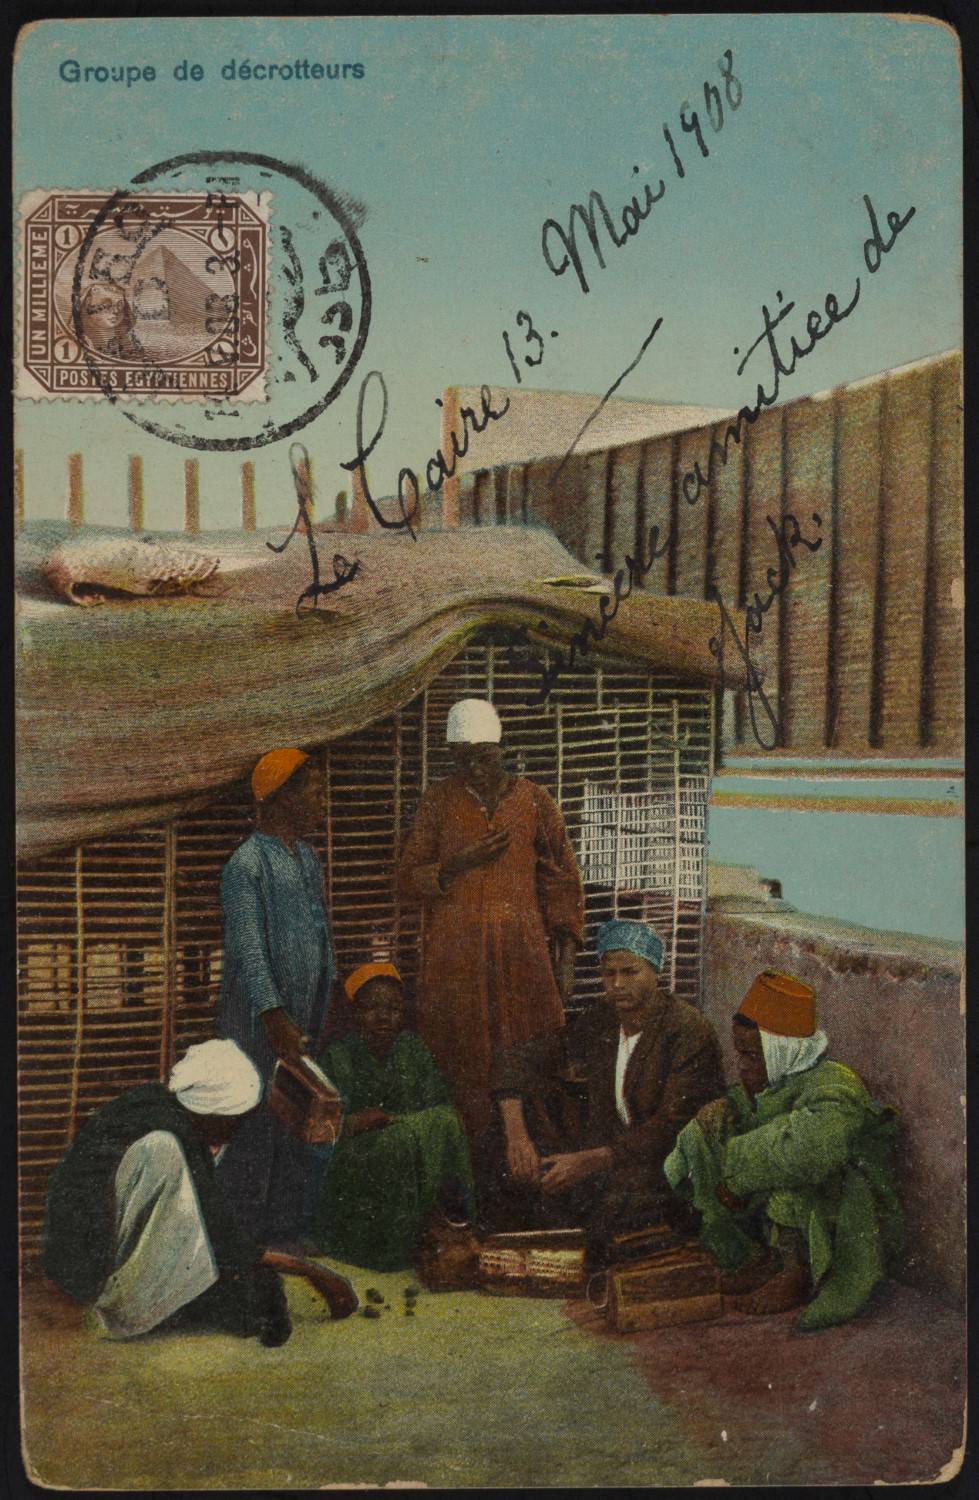 Postcard of a group shoe-shiners, Cairo, May 13, 1908